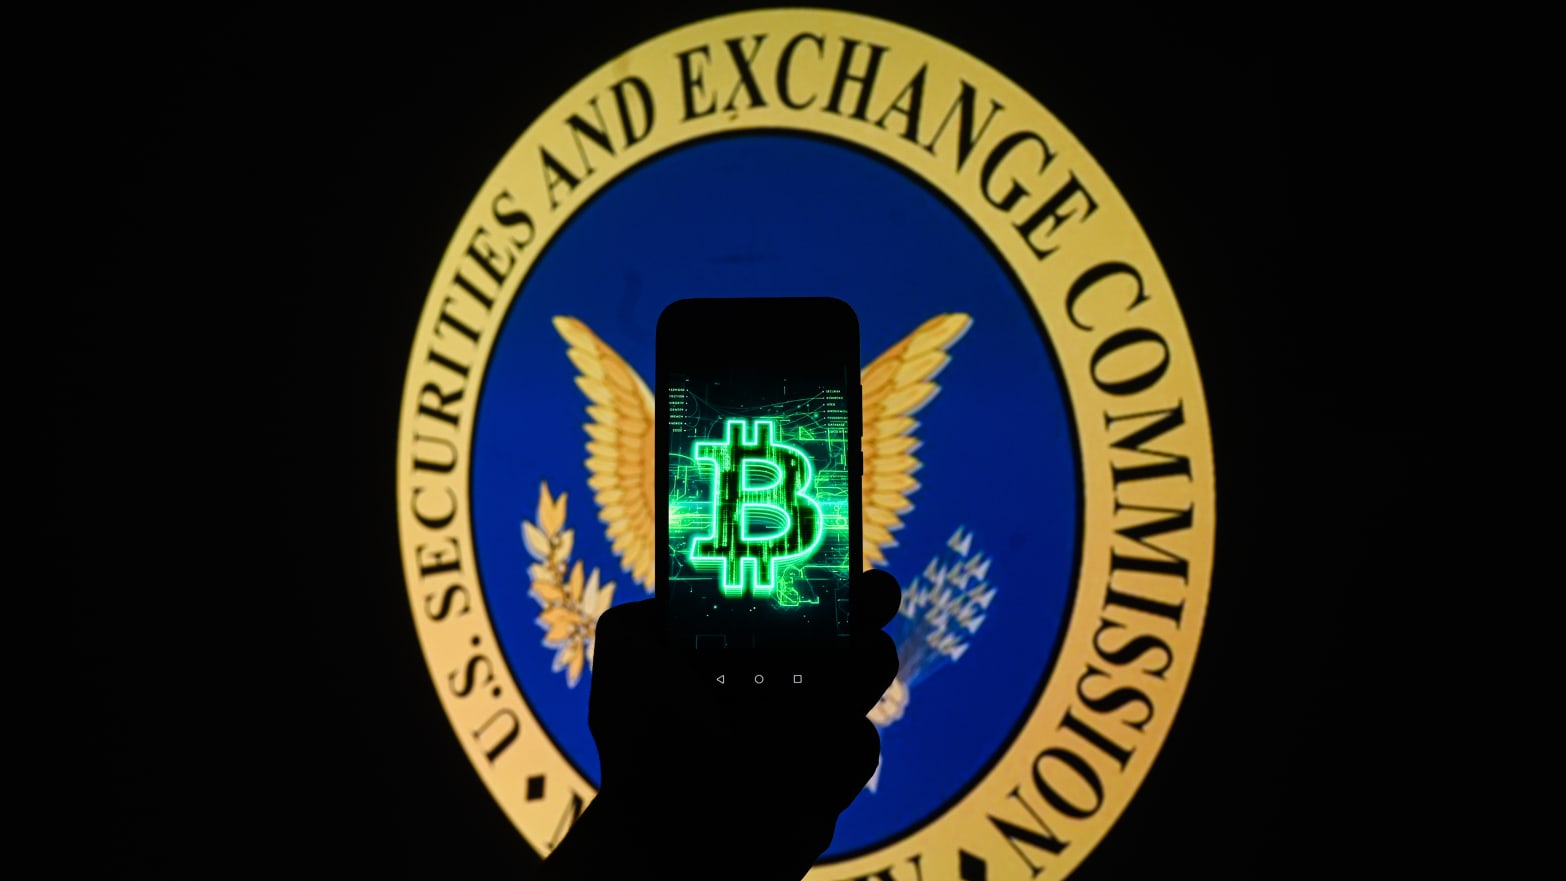 US Securities and Exchange Commission